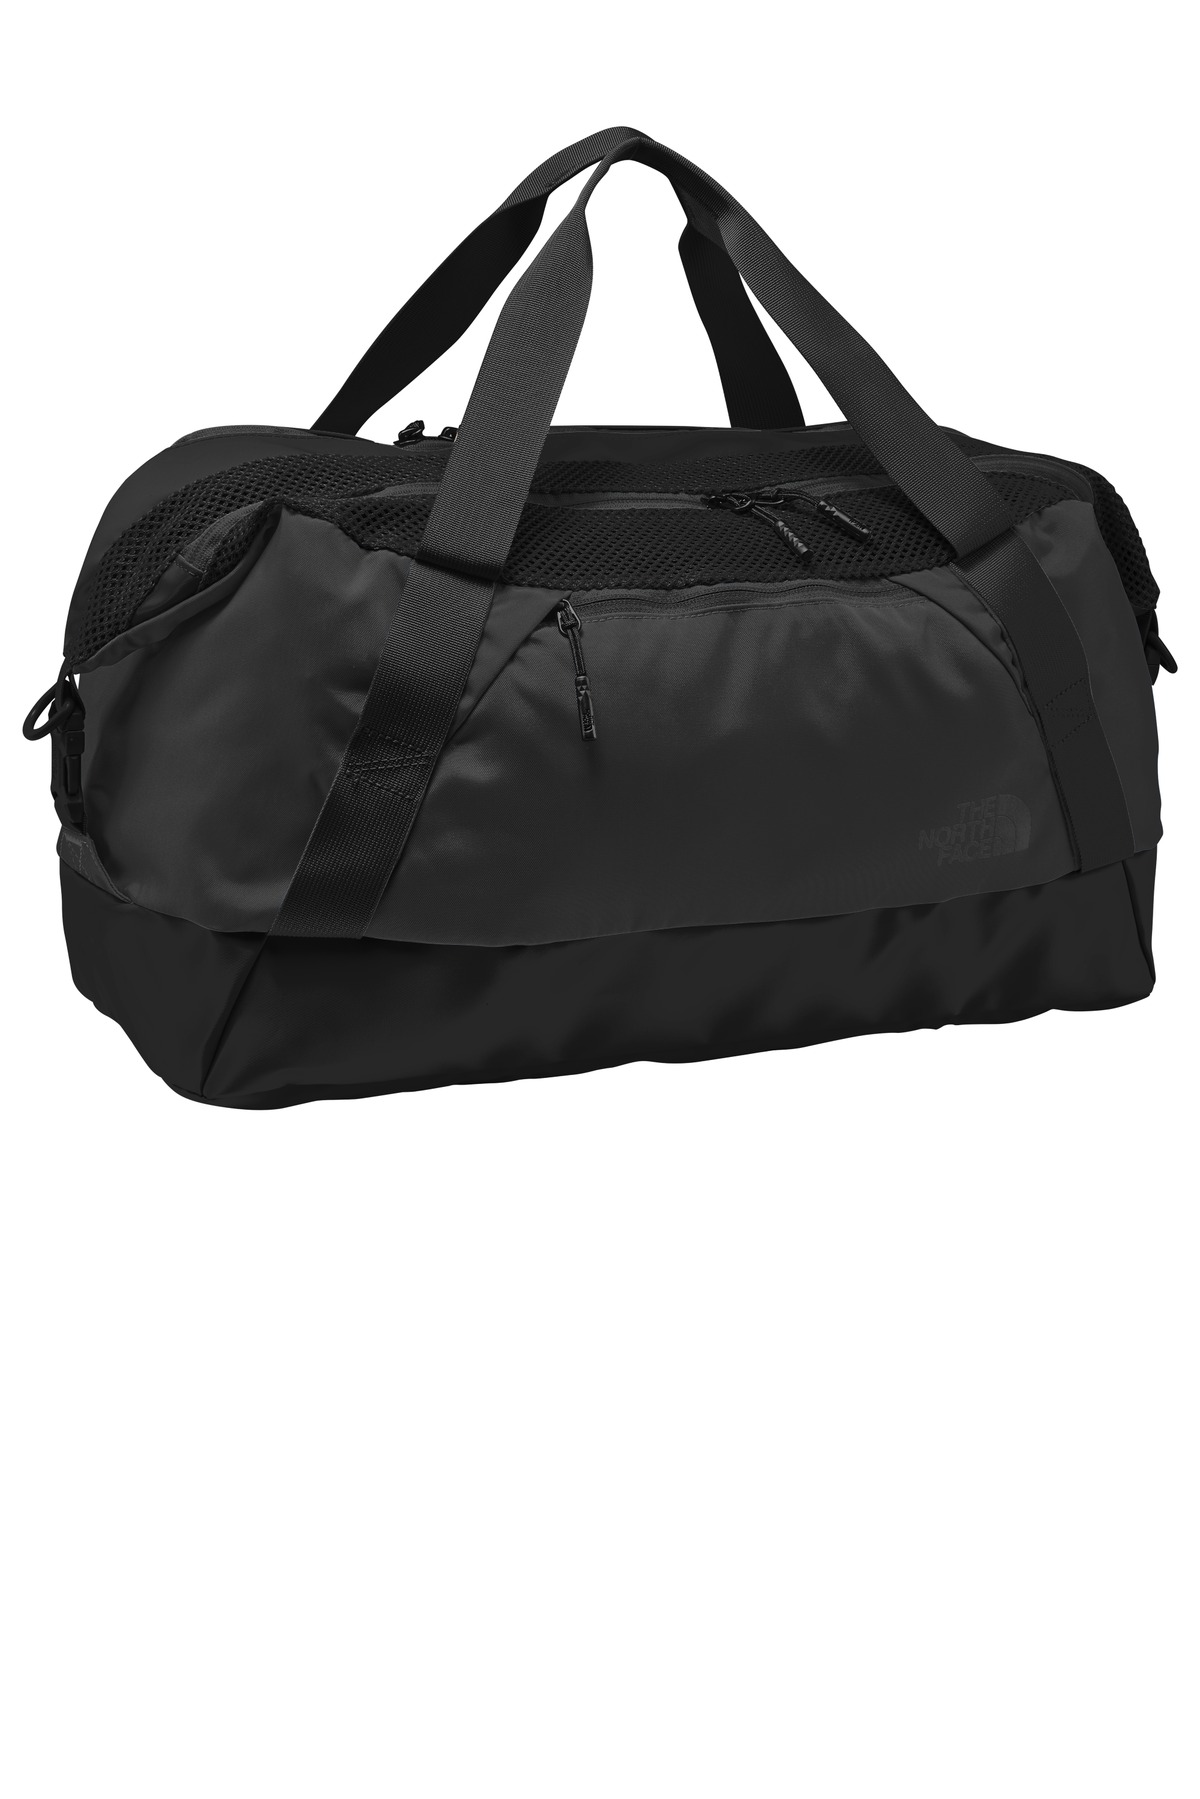 The North Face Apex Duffel. NF0A3KXX